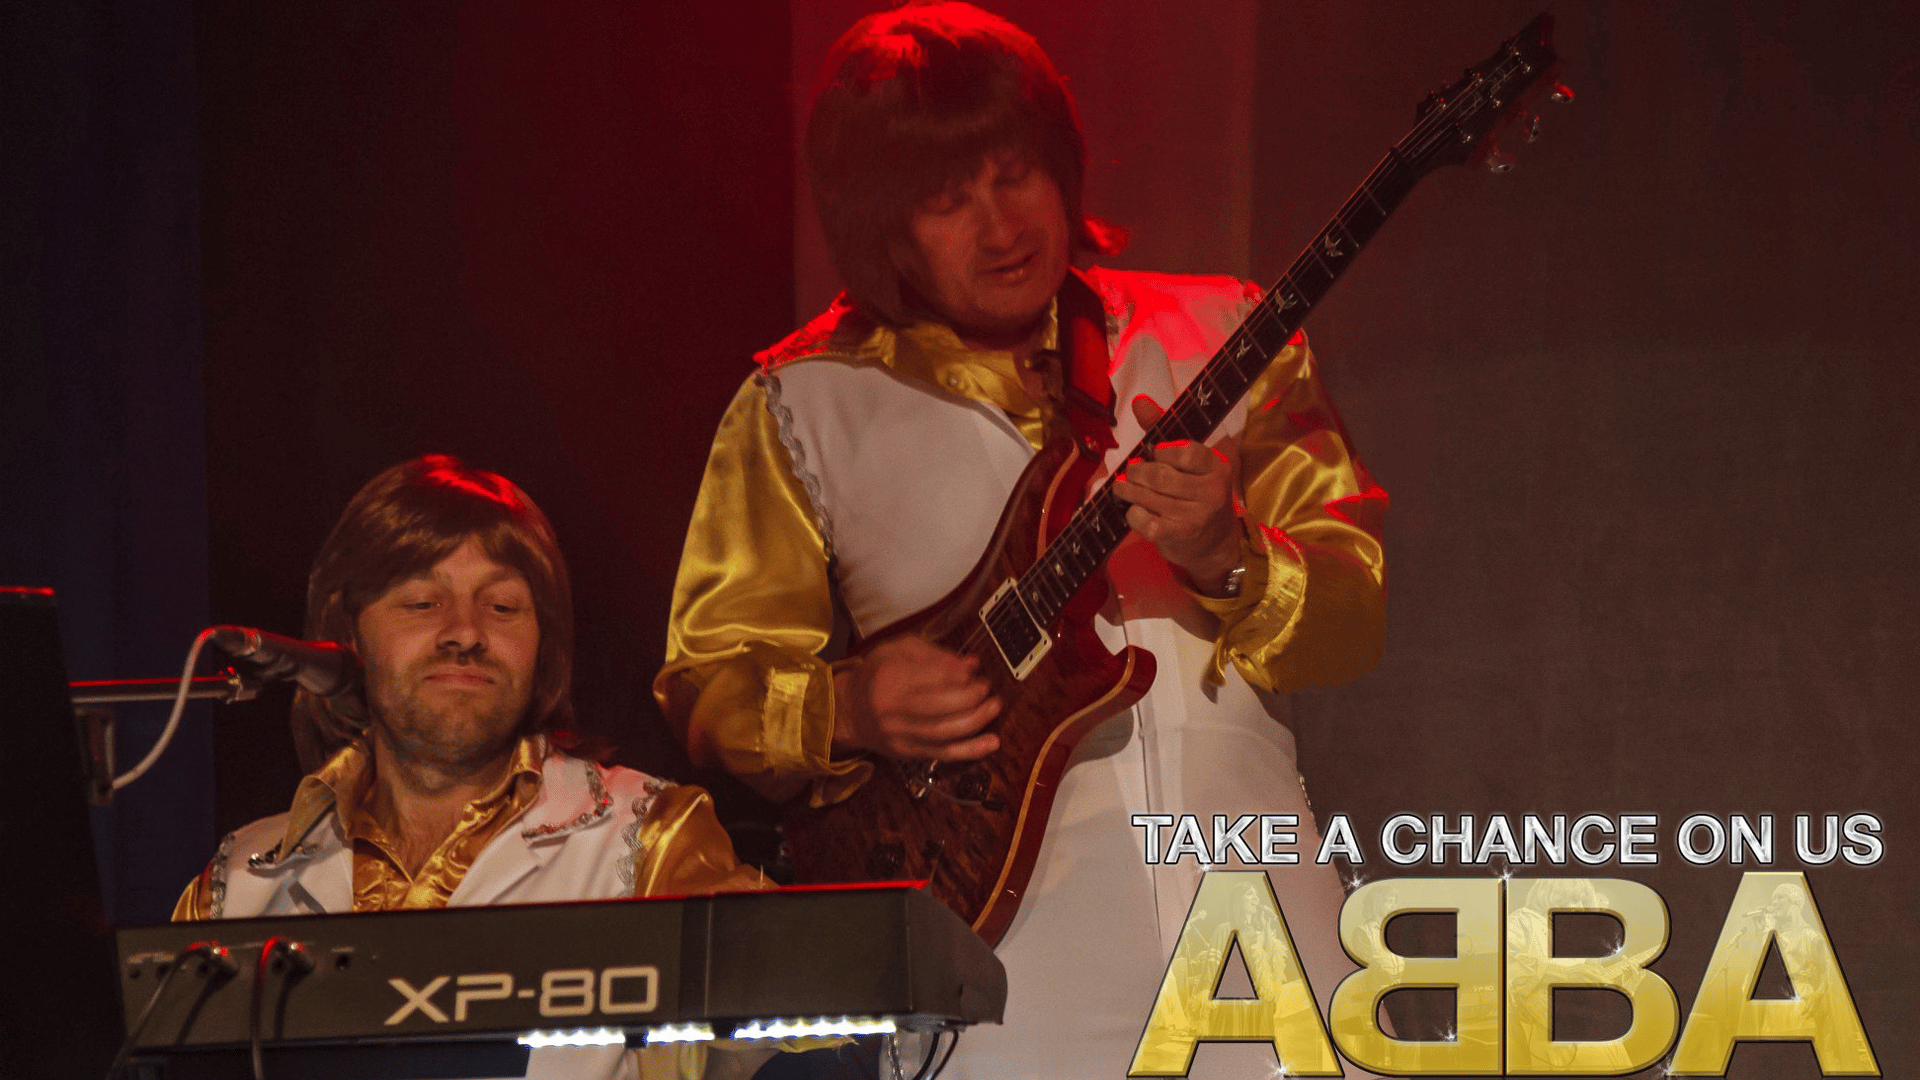 The Benny and Bjorn tribute performers next to each other in white and gold all-in-one outfits, playing guitar and keys.